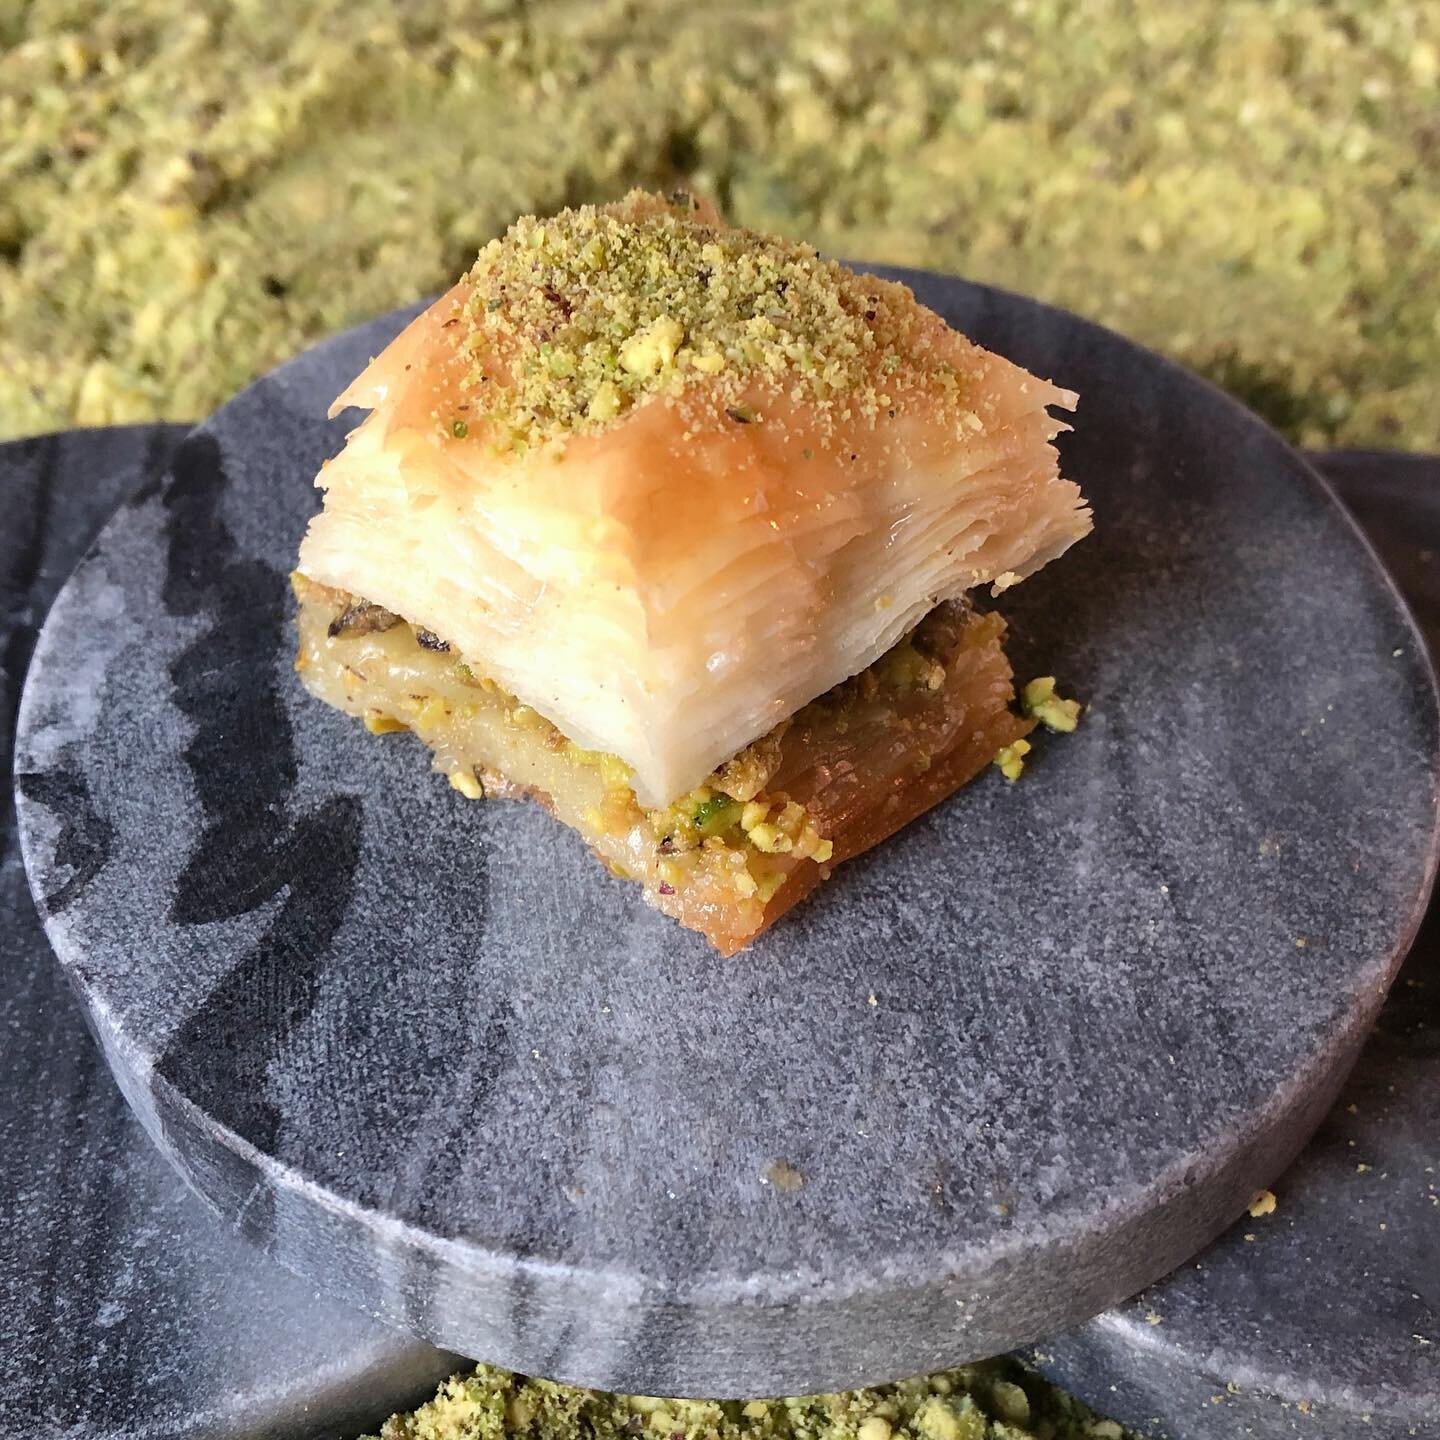 Double the pistachios! #turkishbaklava Your new love affair in the pantry! Pair it with your ice-cream or your coffee or treat yourself for no reason! The box makes a great gift to take to any party. Available @unionmarketdc location.